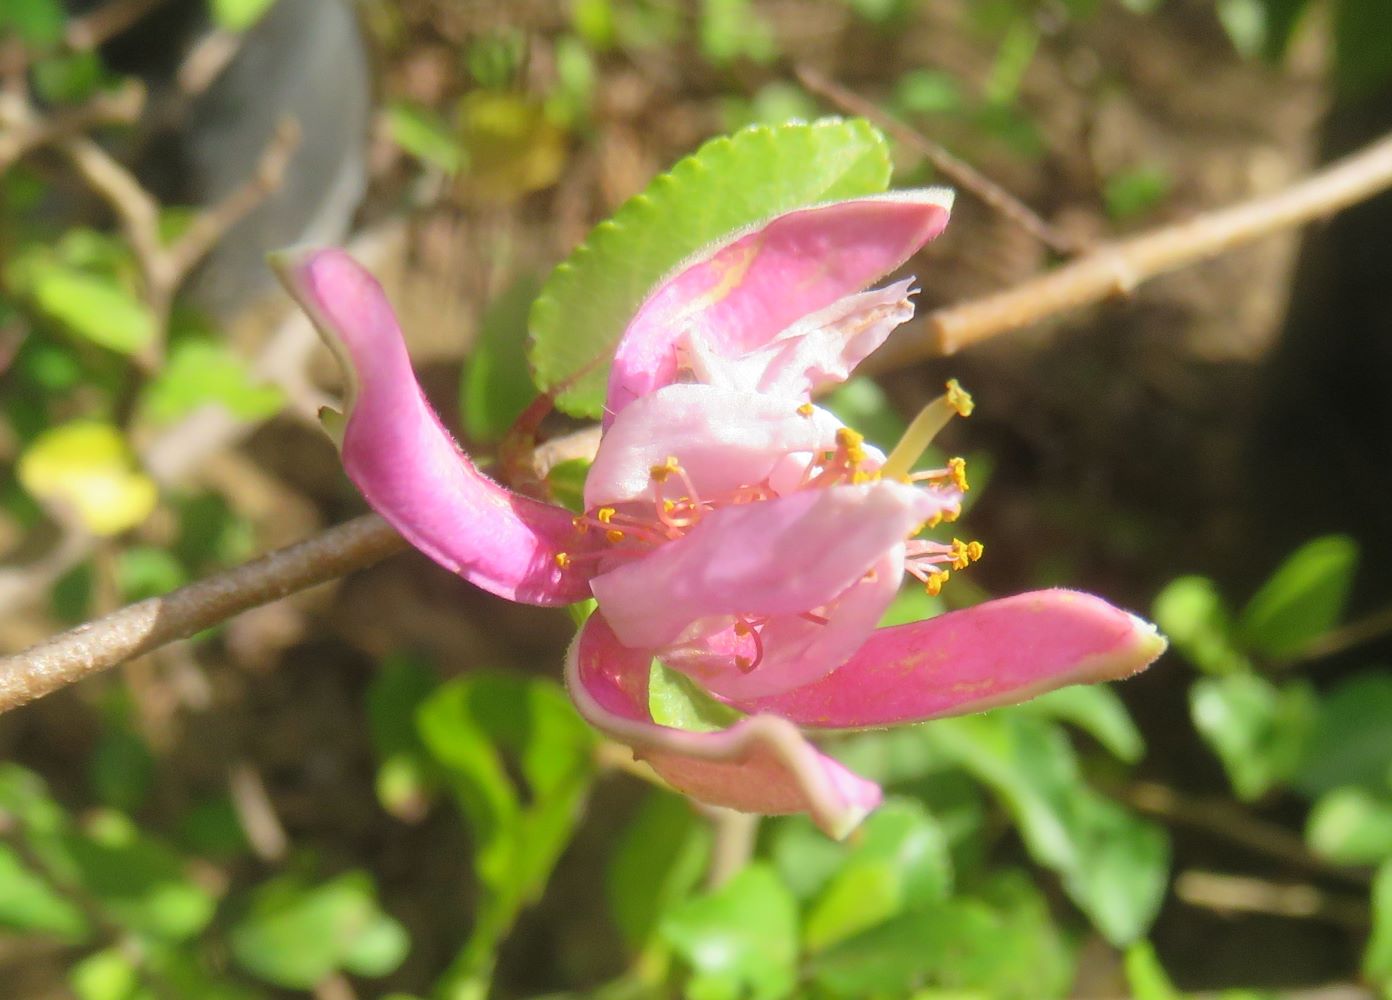 The flower of Grewia occidentalis, with its purple sepals and petals and bright yellow anthers.